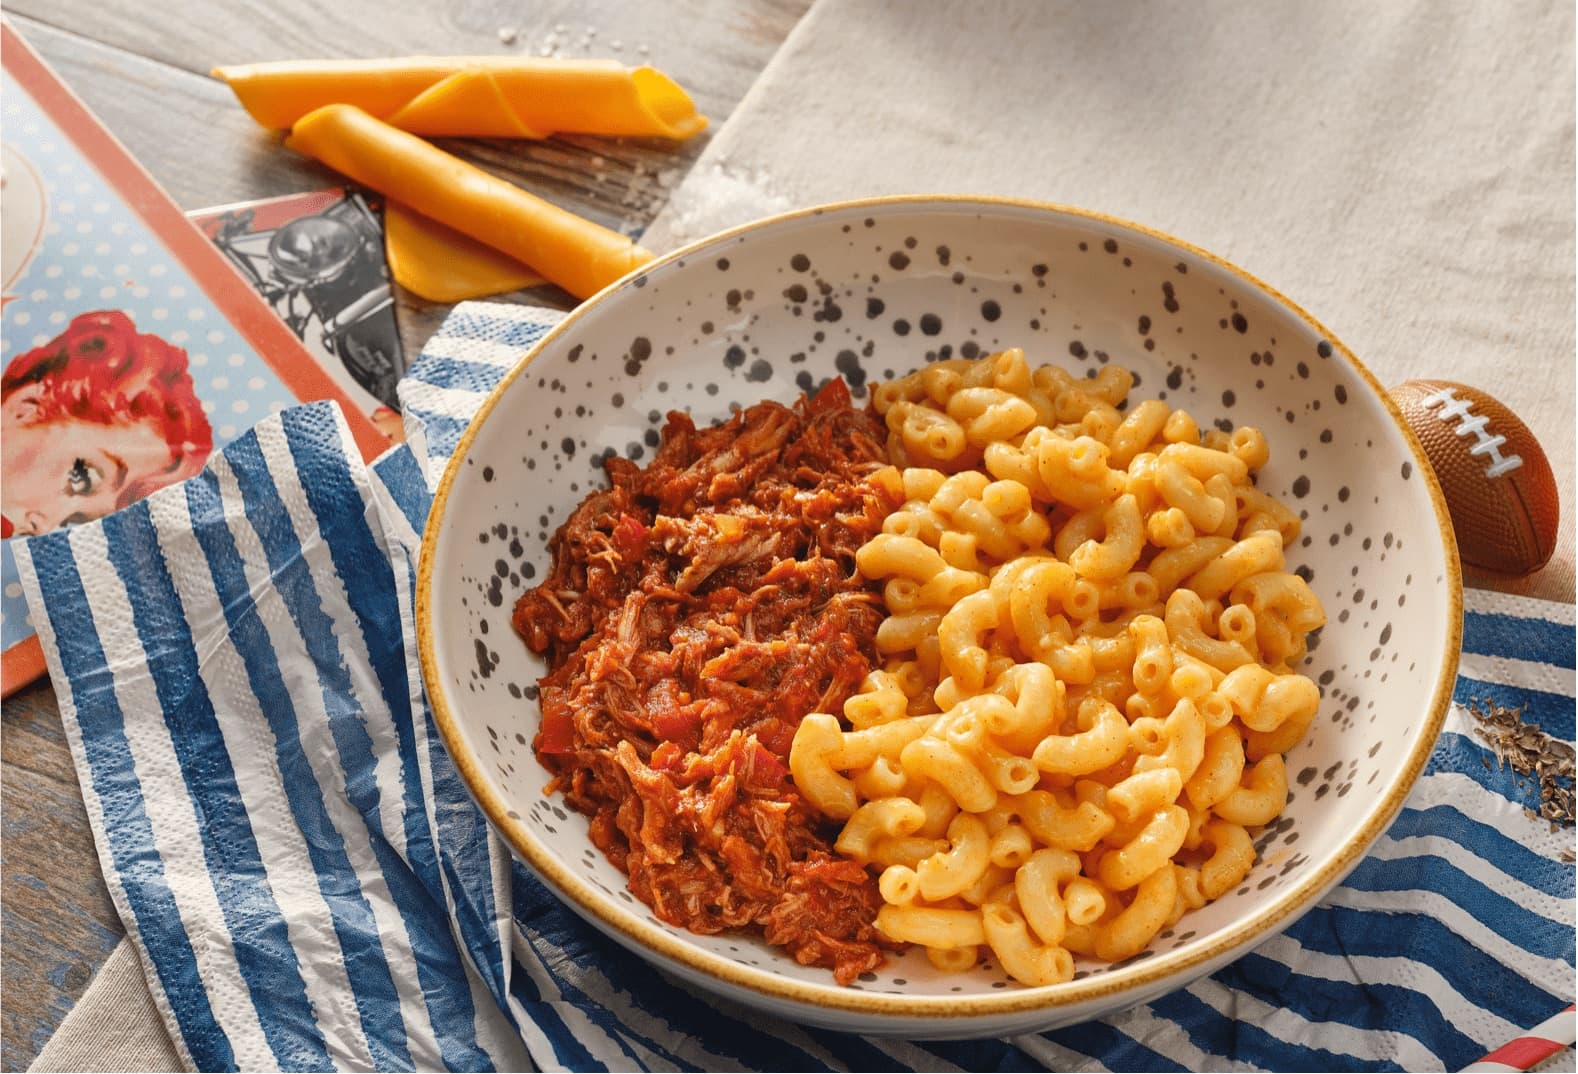 American Spicy Pork With Mac Cheese Secimg 1578x1074 542534 609094 